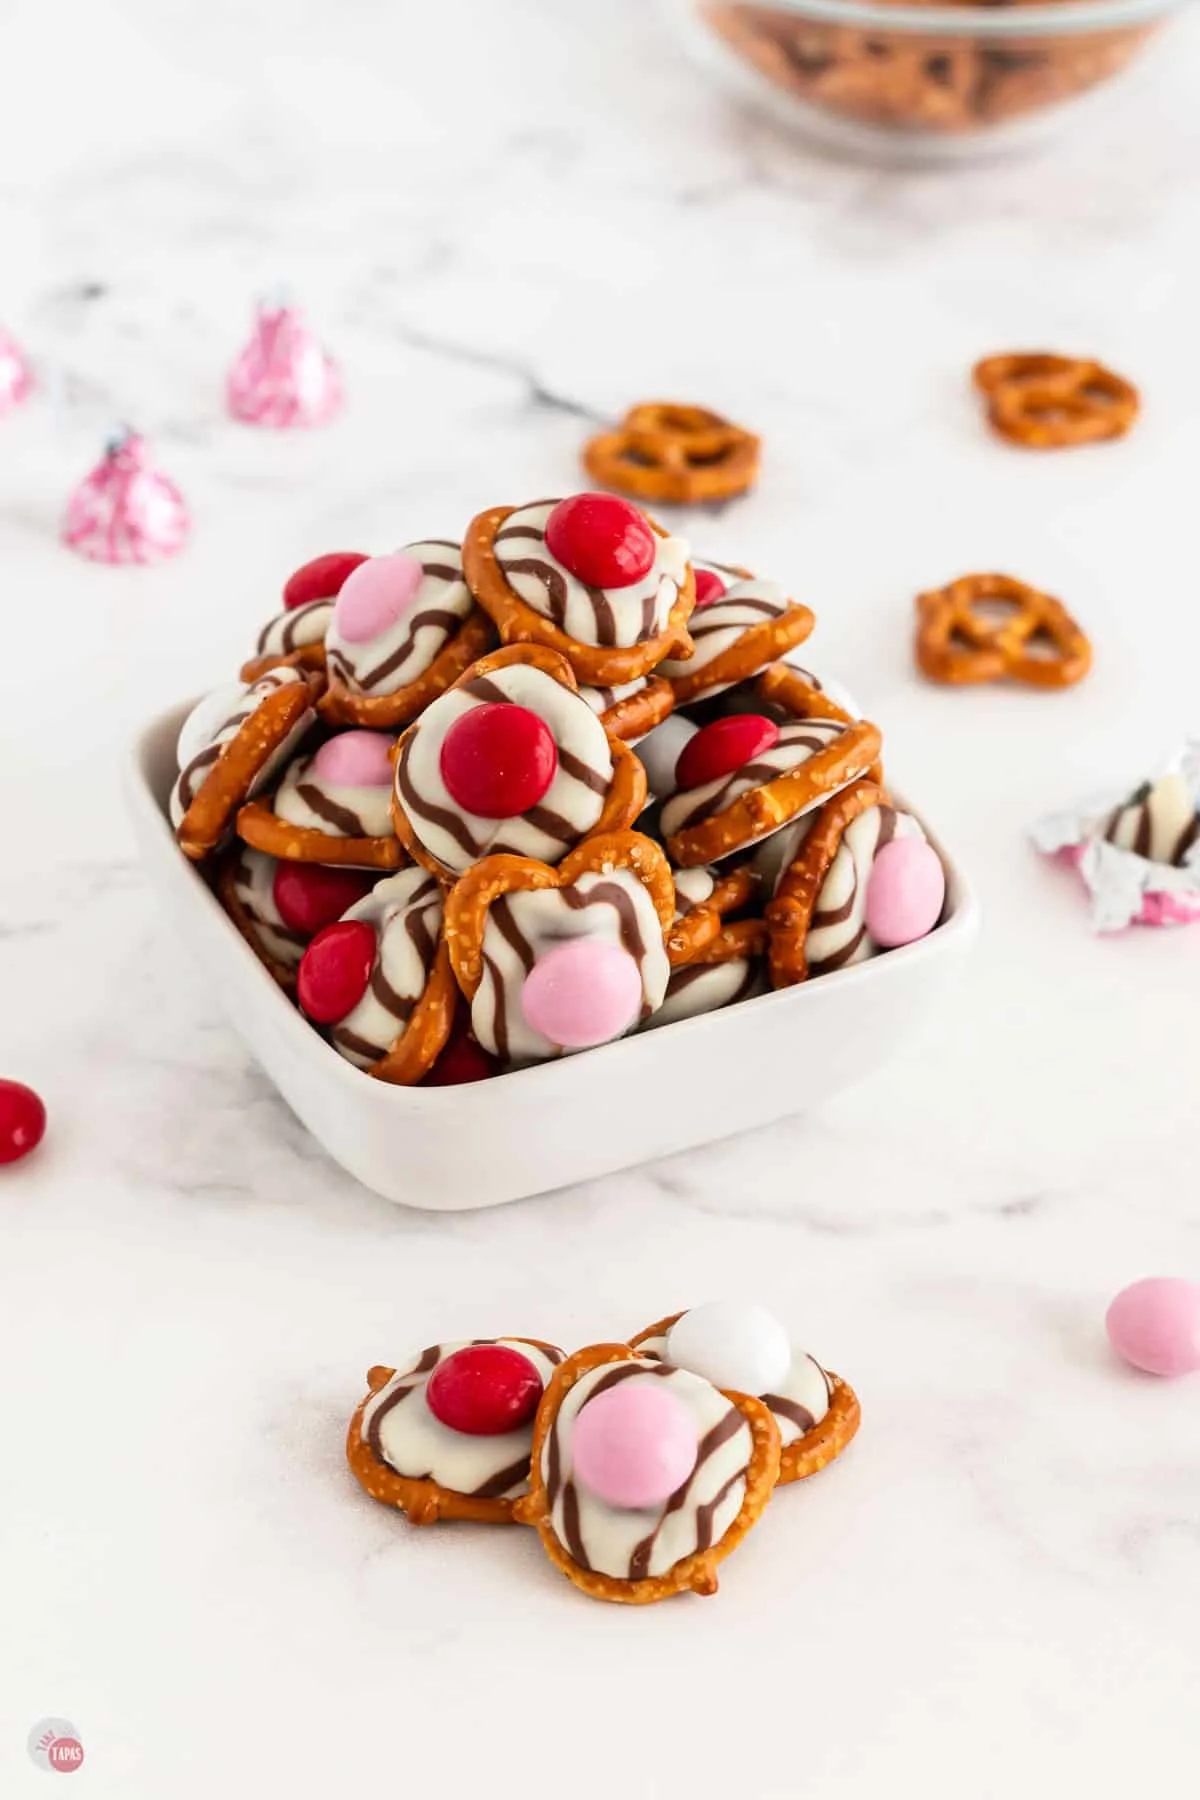 Pretzel M&M Hug Bites are so easy and fun with just 3 ingredients